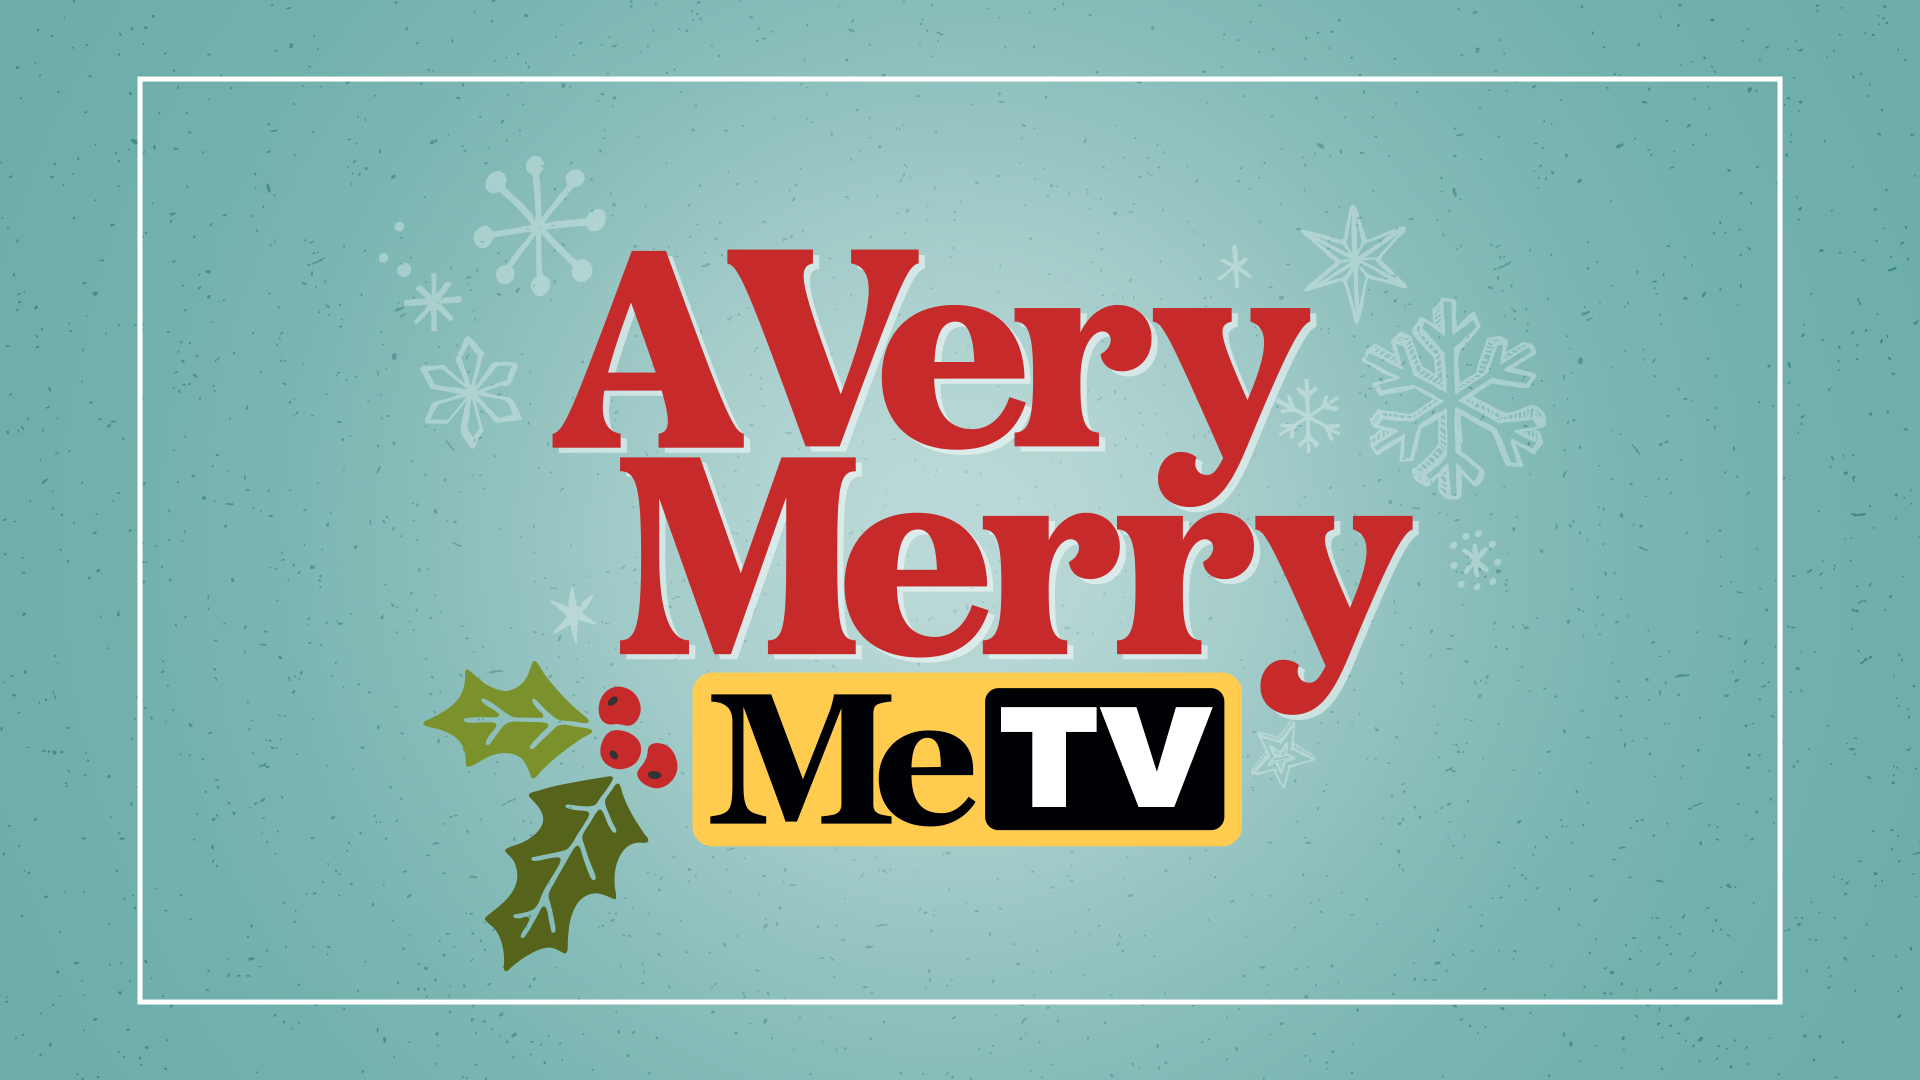 MeTV Reveals Its ‘A Very Merry MeTV’ Annual Holiday Lineup